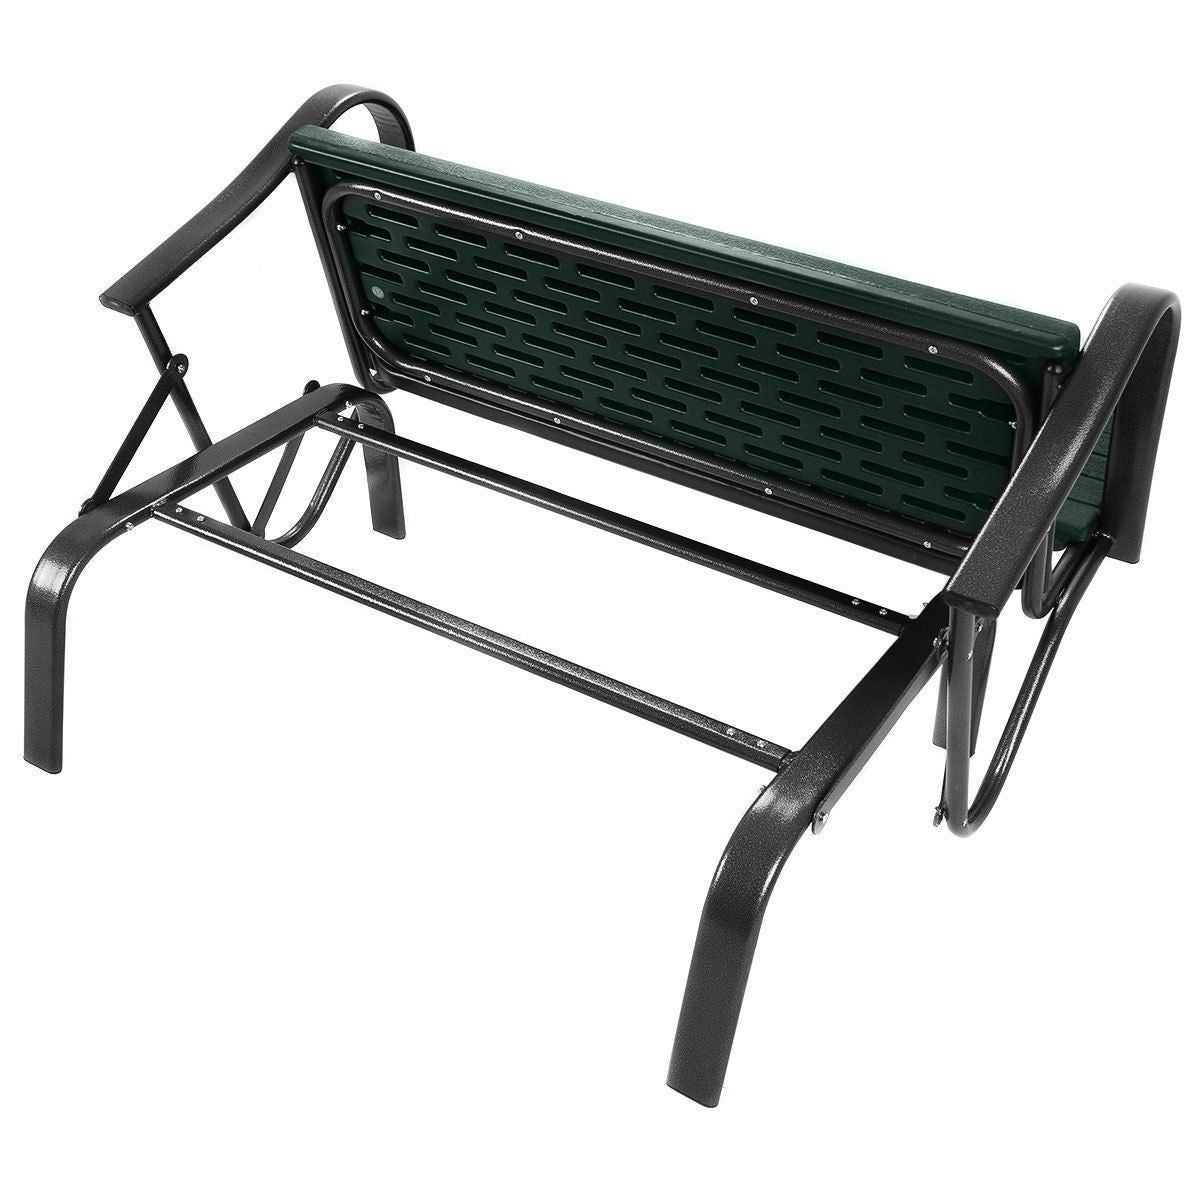 2019 Outdoor Patio Swing Porch Rocker Glider Benches Loveseat Garden Seat Steel Intended For Costway Outdoor Patio Swing Porch Rocker Glider Bench Loveseat Garden Seat  Steel (View 8 of 25)